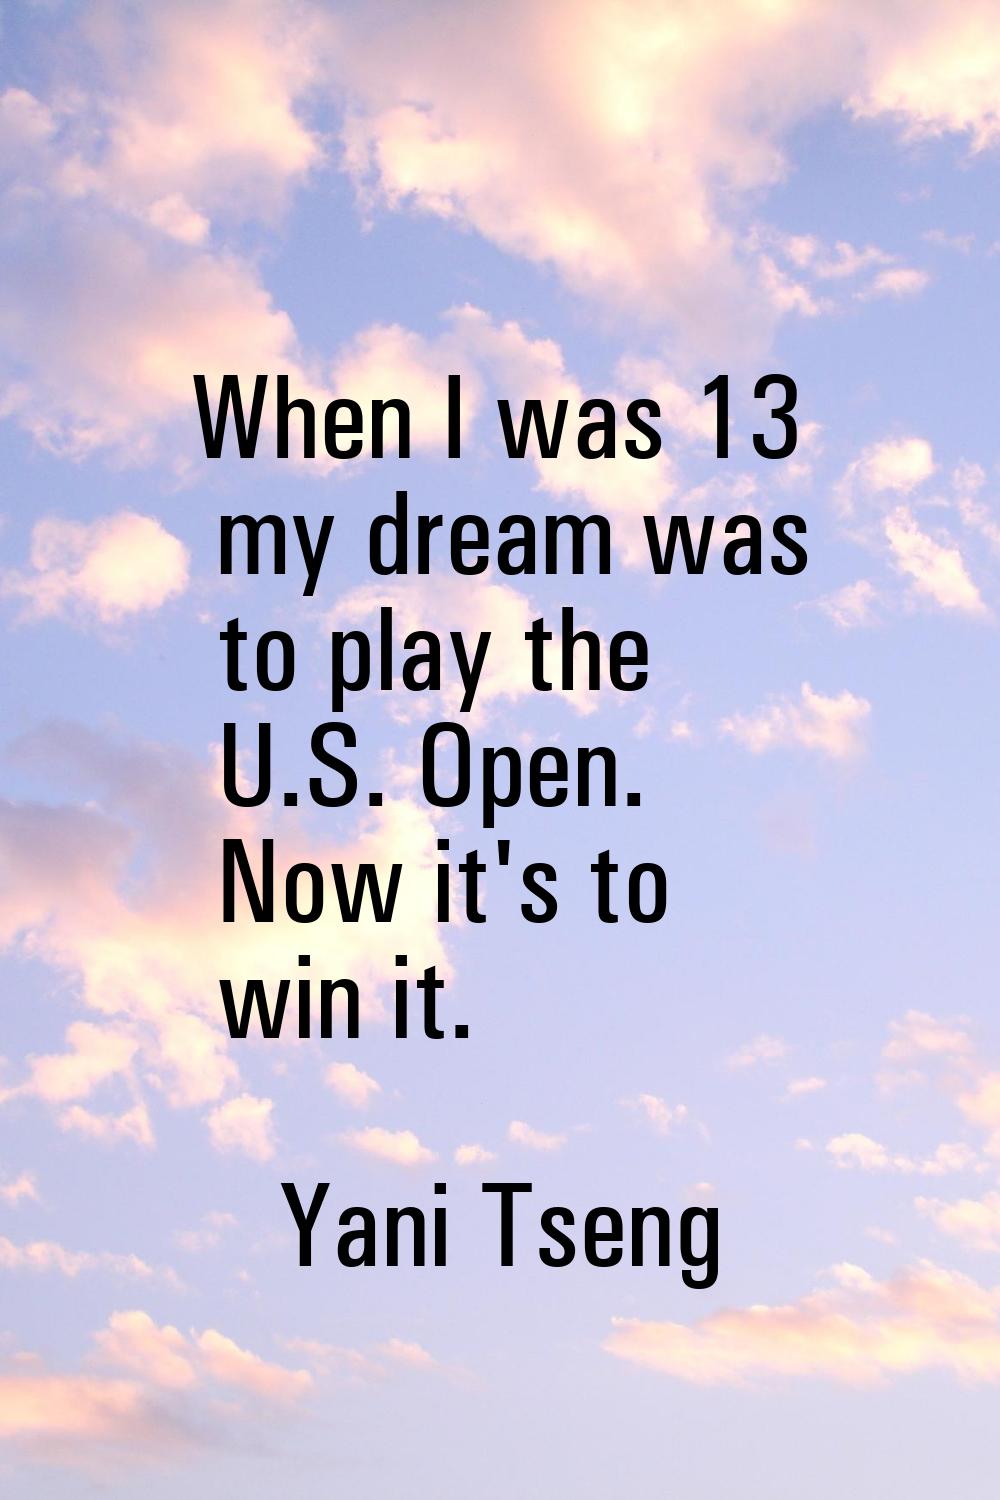 When I was 13 my dream was to play the U.S. Open. Now it's to win it.